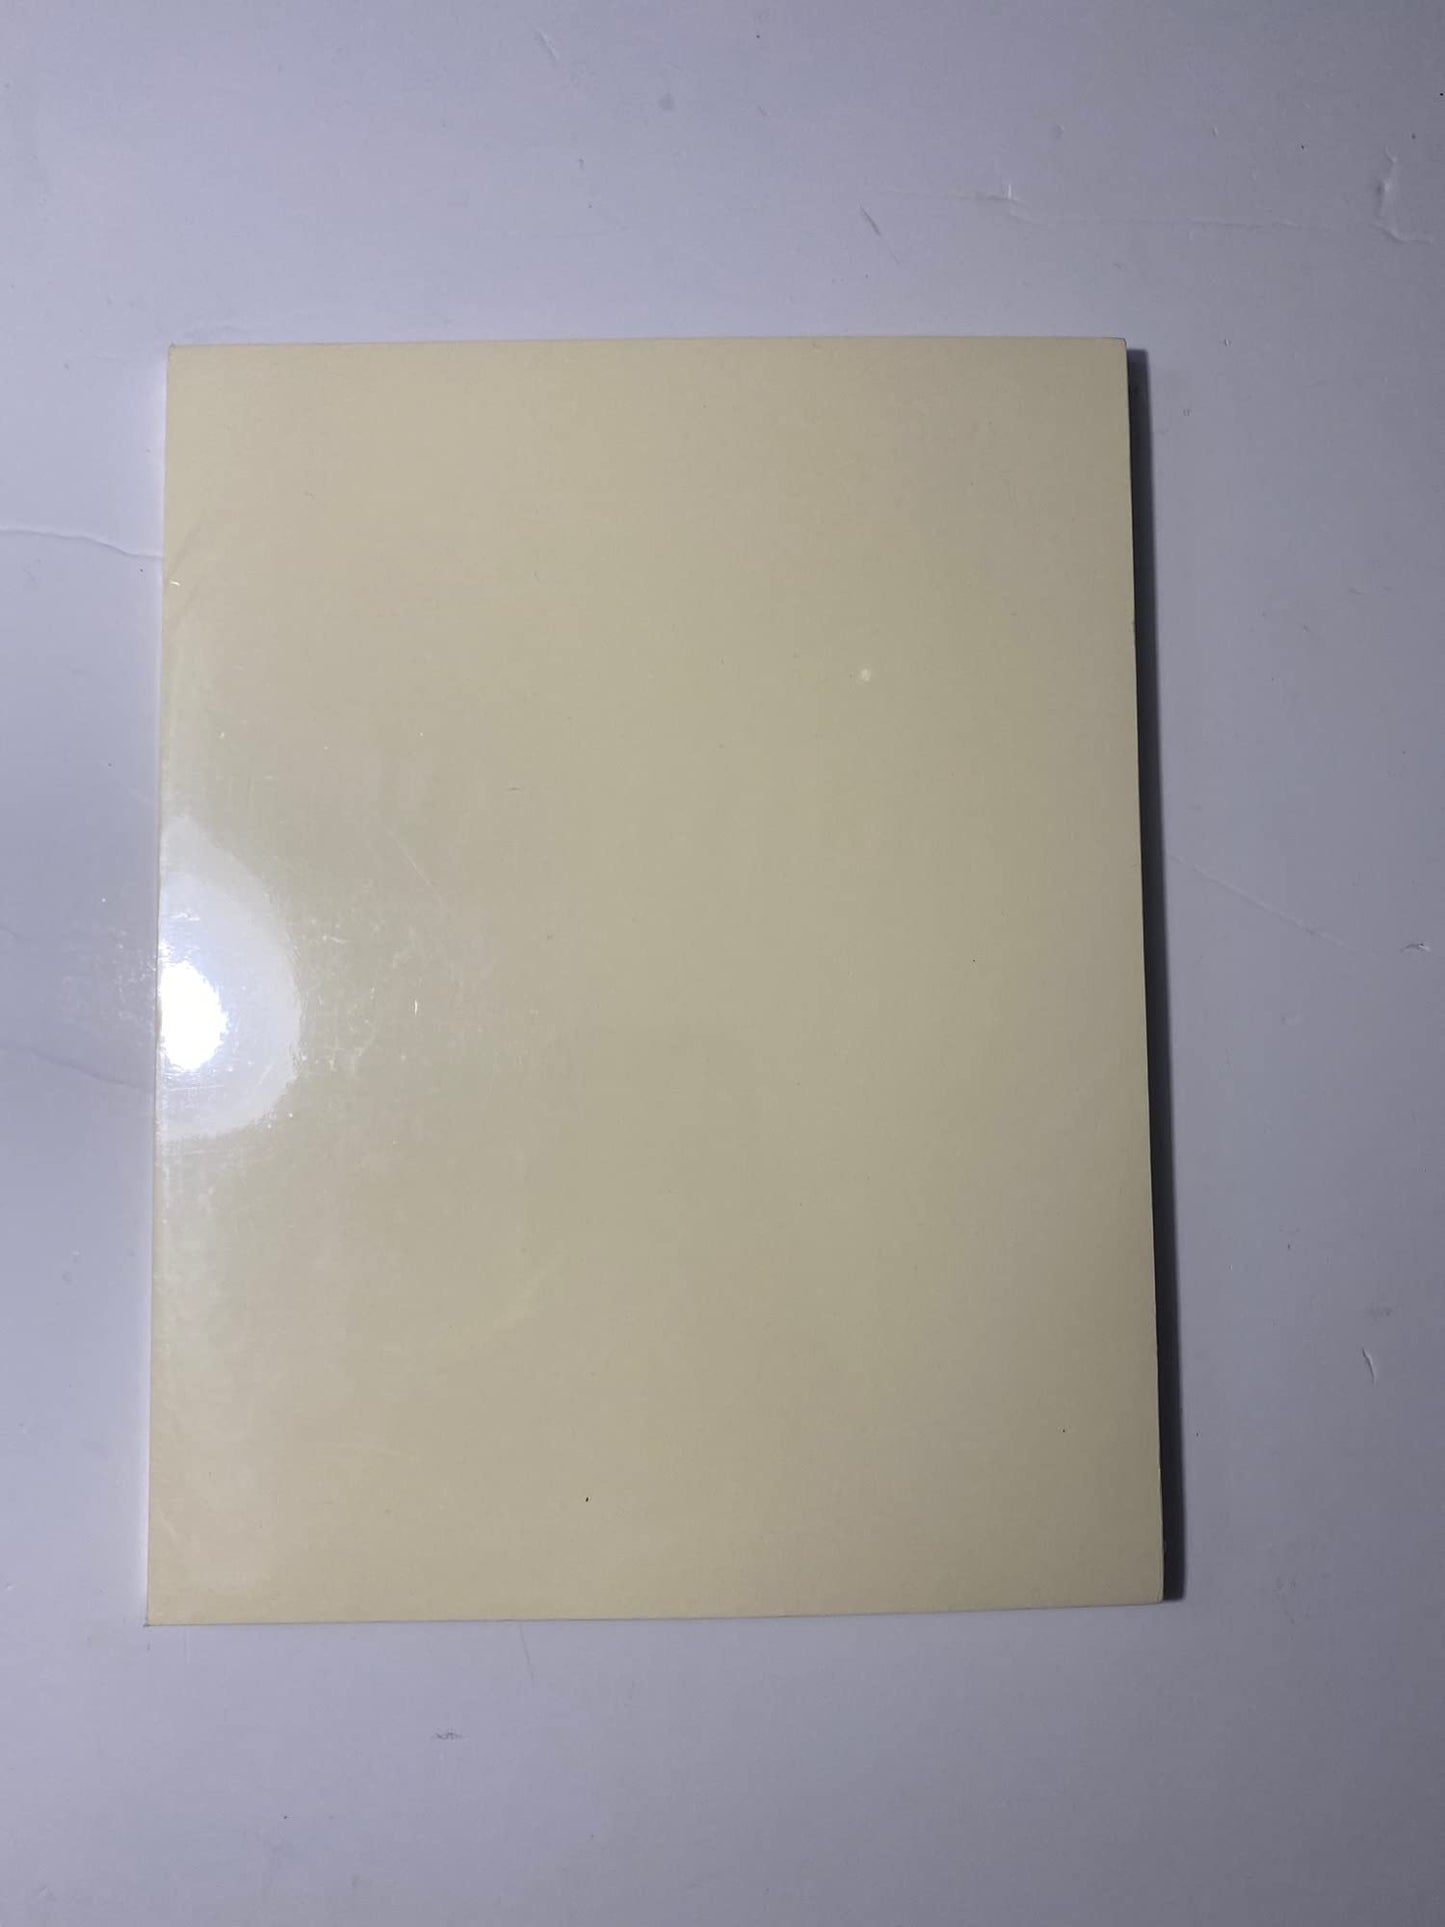 Recollections Cardstock Paper, 8 1/2 X 11 Cream - 50 Sheets